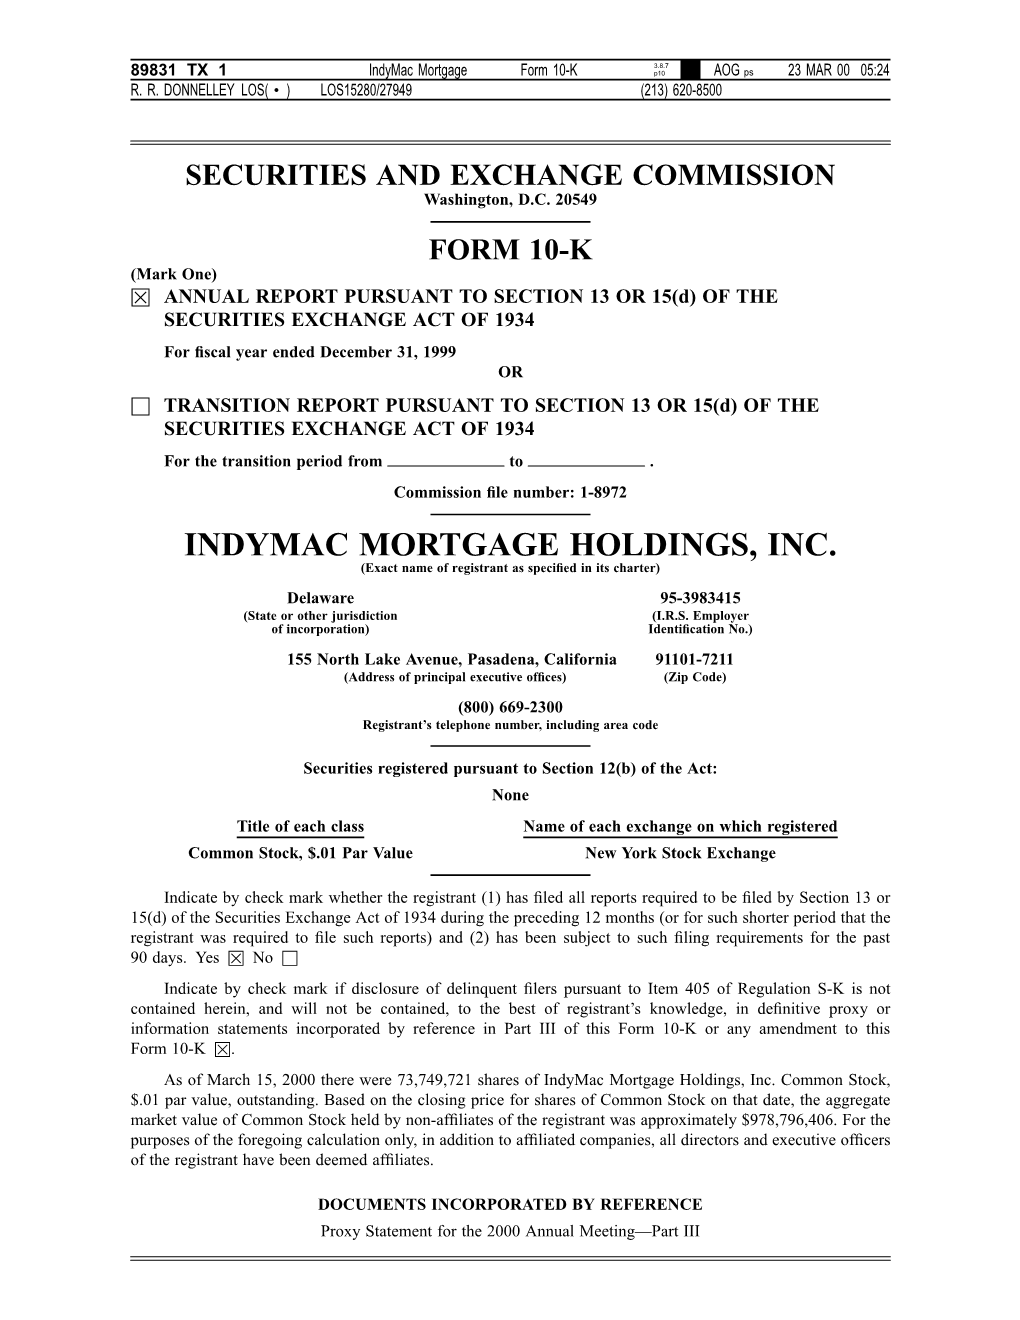 INDYMAC MORTGAGE HOLDINGS, INC. (Exact Name of Registrant As Speciﬁed in Its Charter) Delaware 95-3983415 (State Or Other Jurisdiction (I.R.S